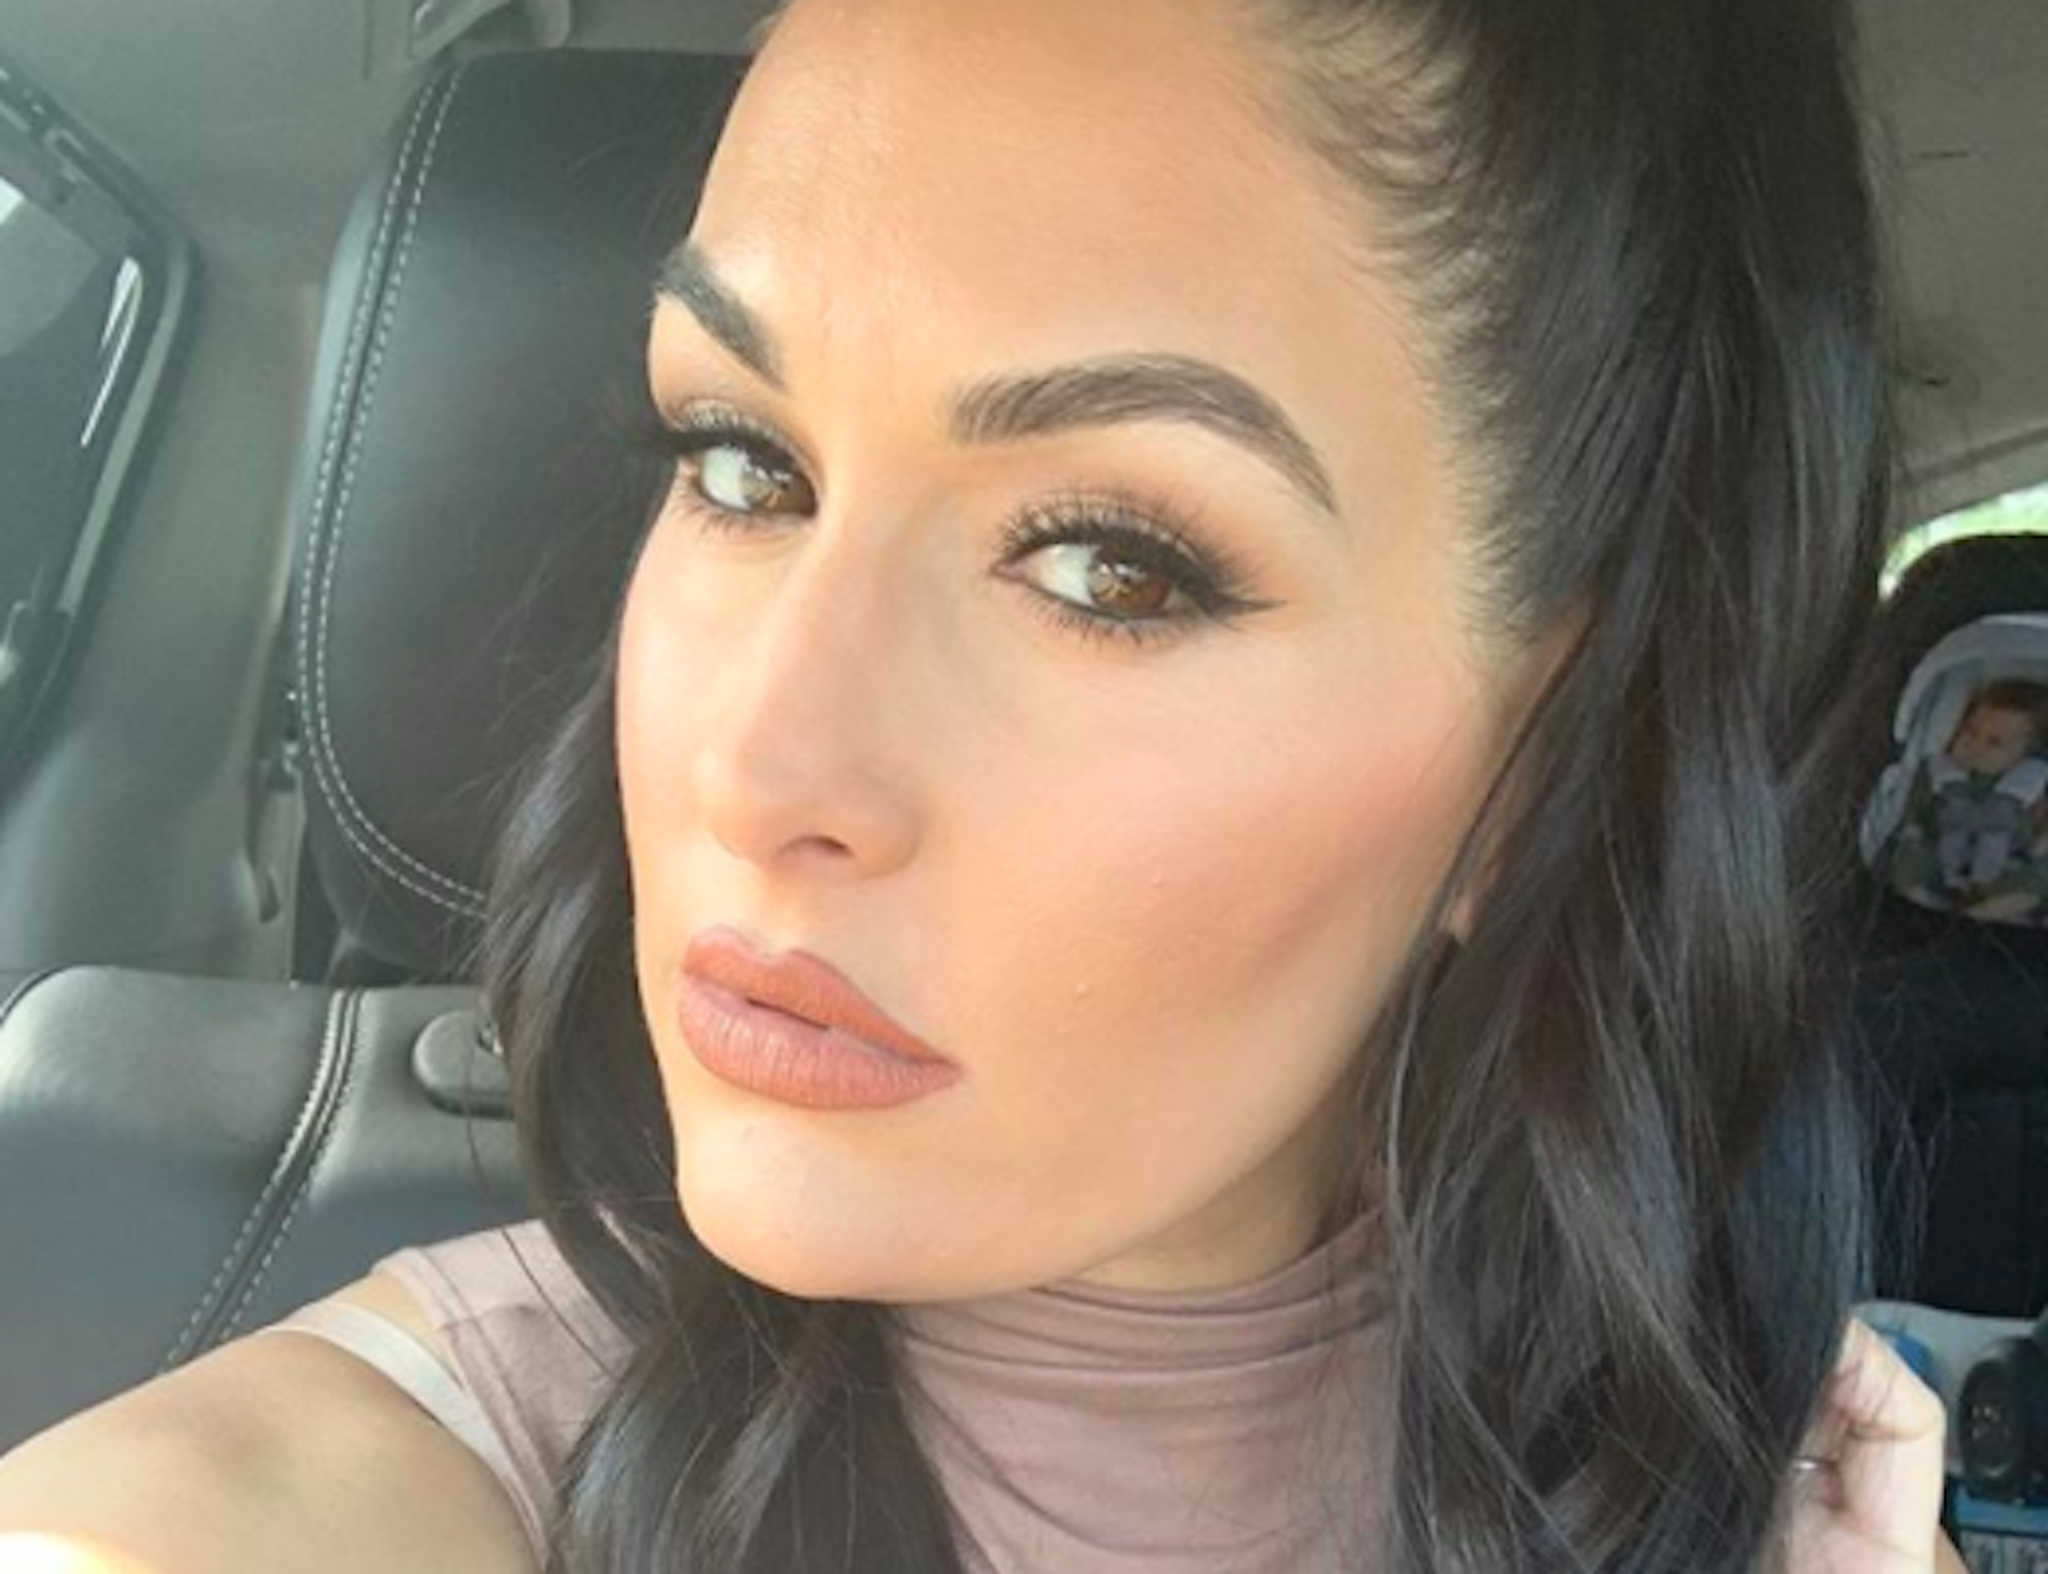 Nikki Bella Reveals She 'Doesn't Feel Sexy' After Giving Birth in Postpartum Confession